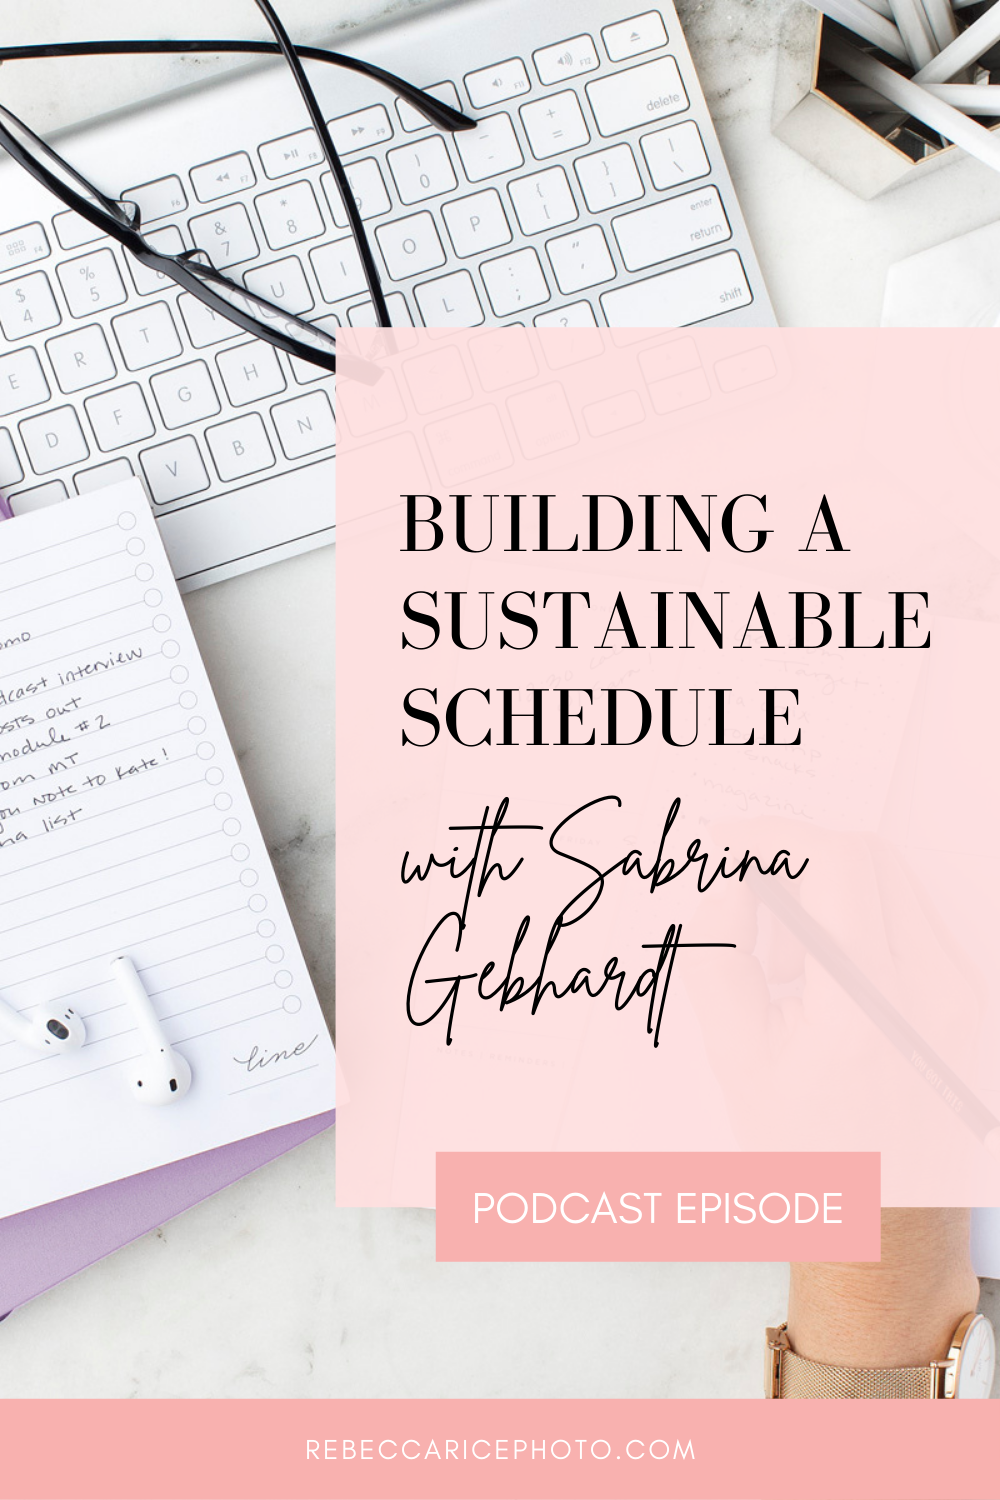 Building a Sustainable Schedule with Sabrina Gebhardt | Photography Business Tips